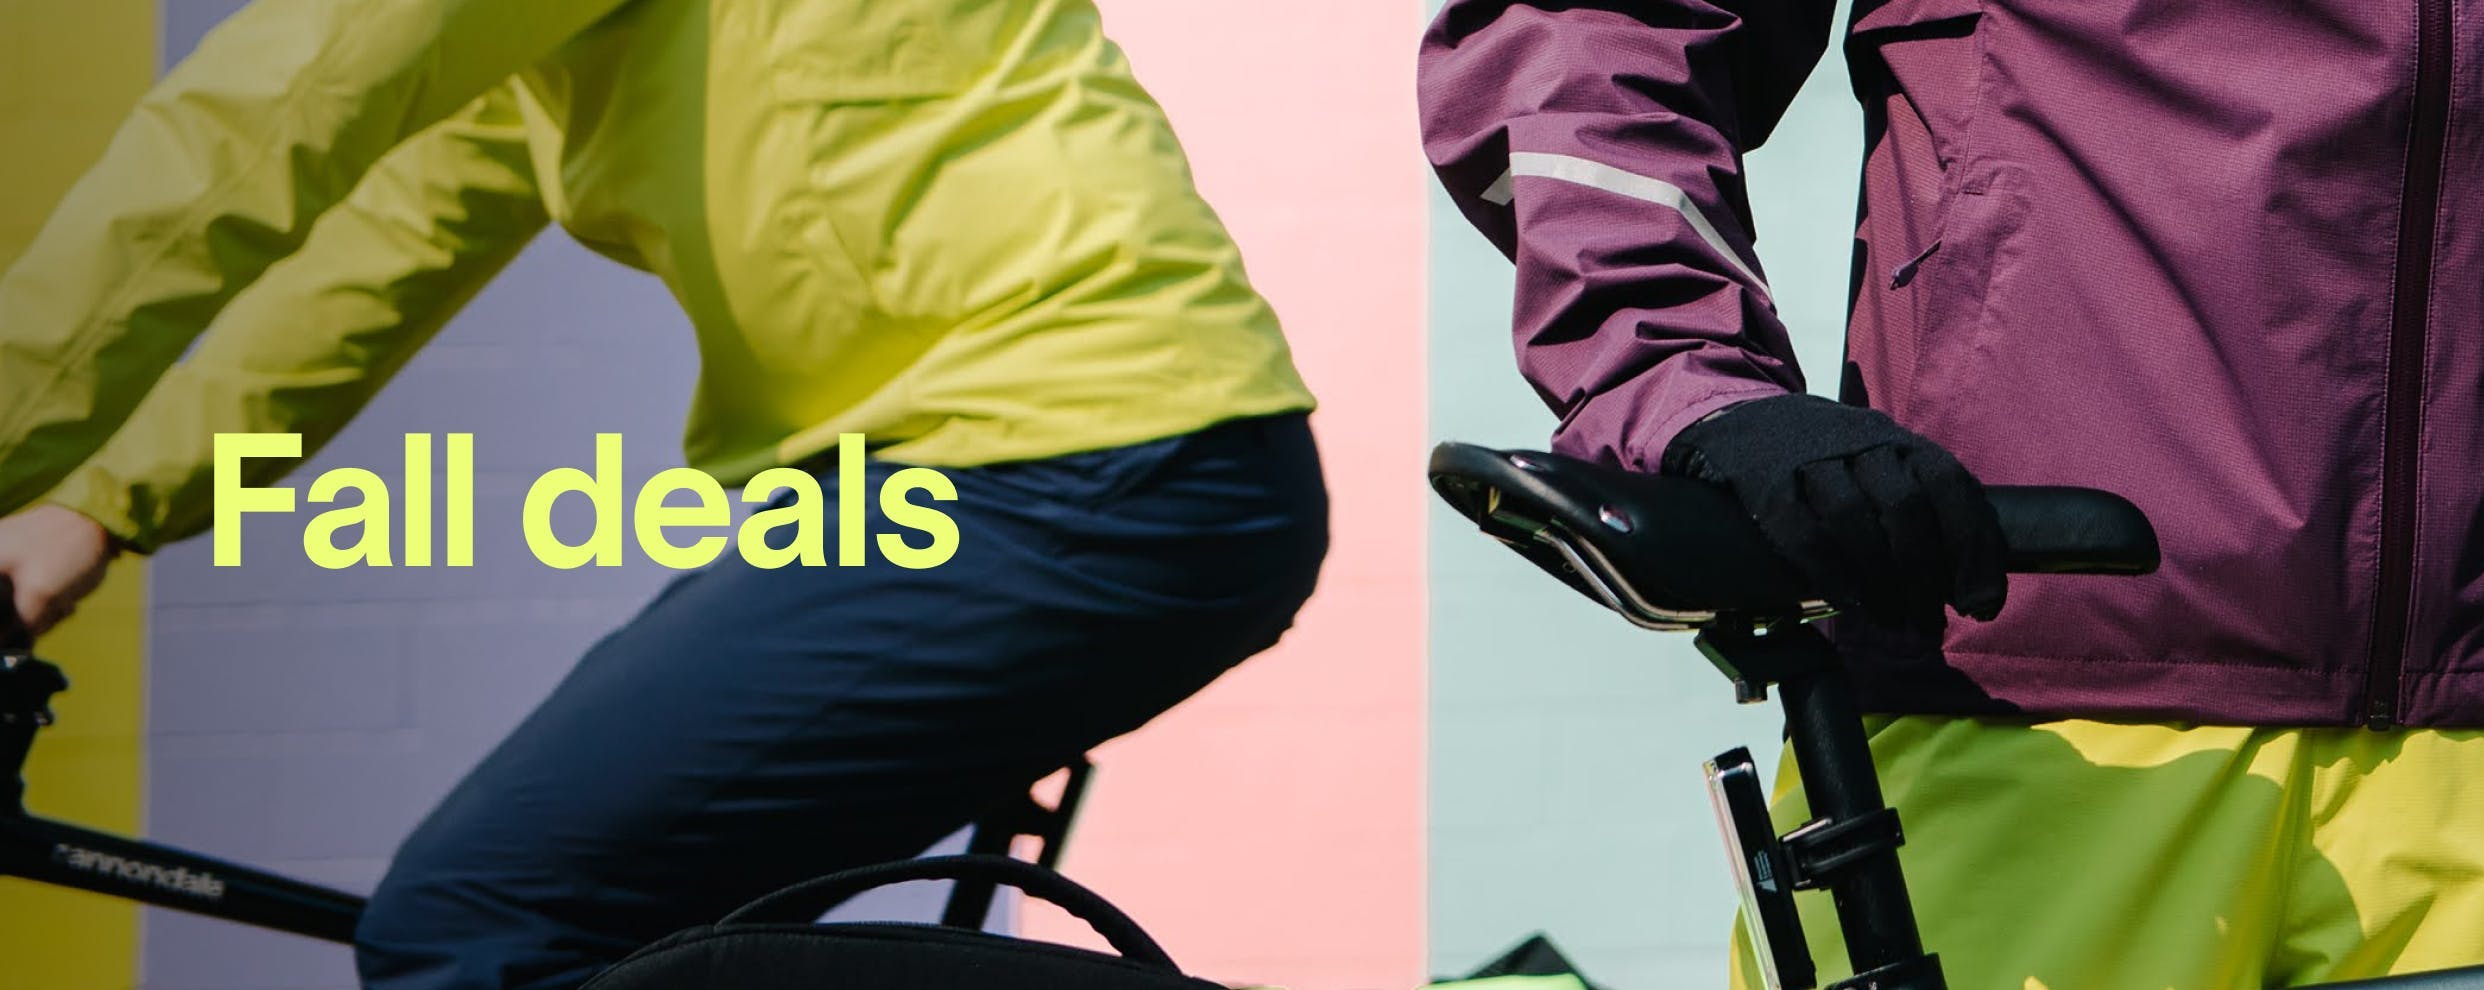 MEC Cycling Clothing Deals. Get up to 35% off select styles to refresh your sad-looking bike tights (you know the ones). Ends September 27